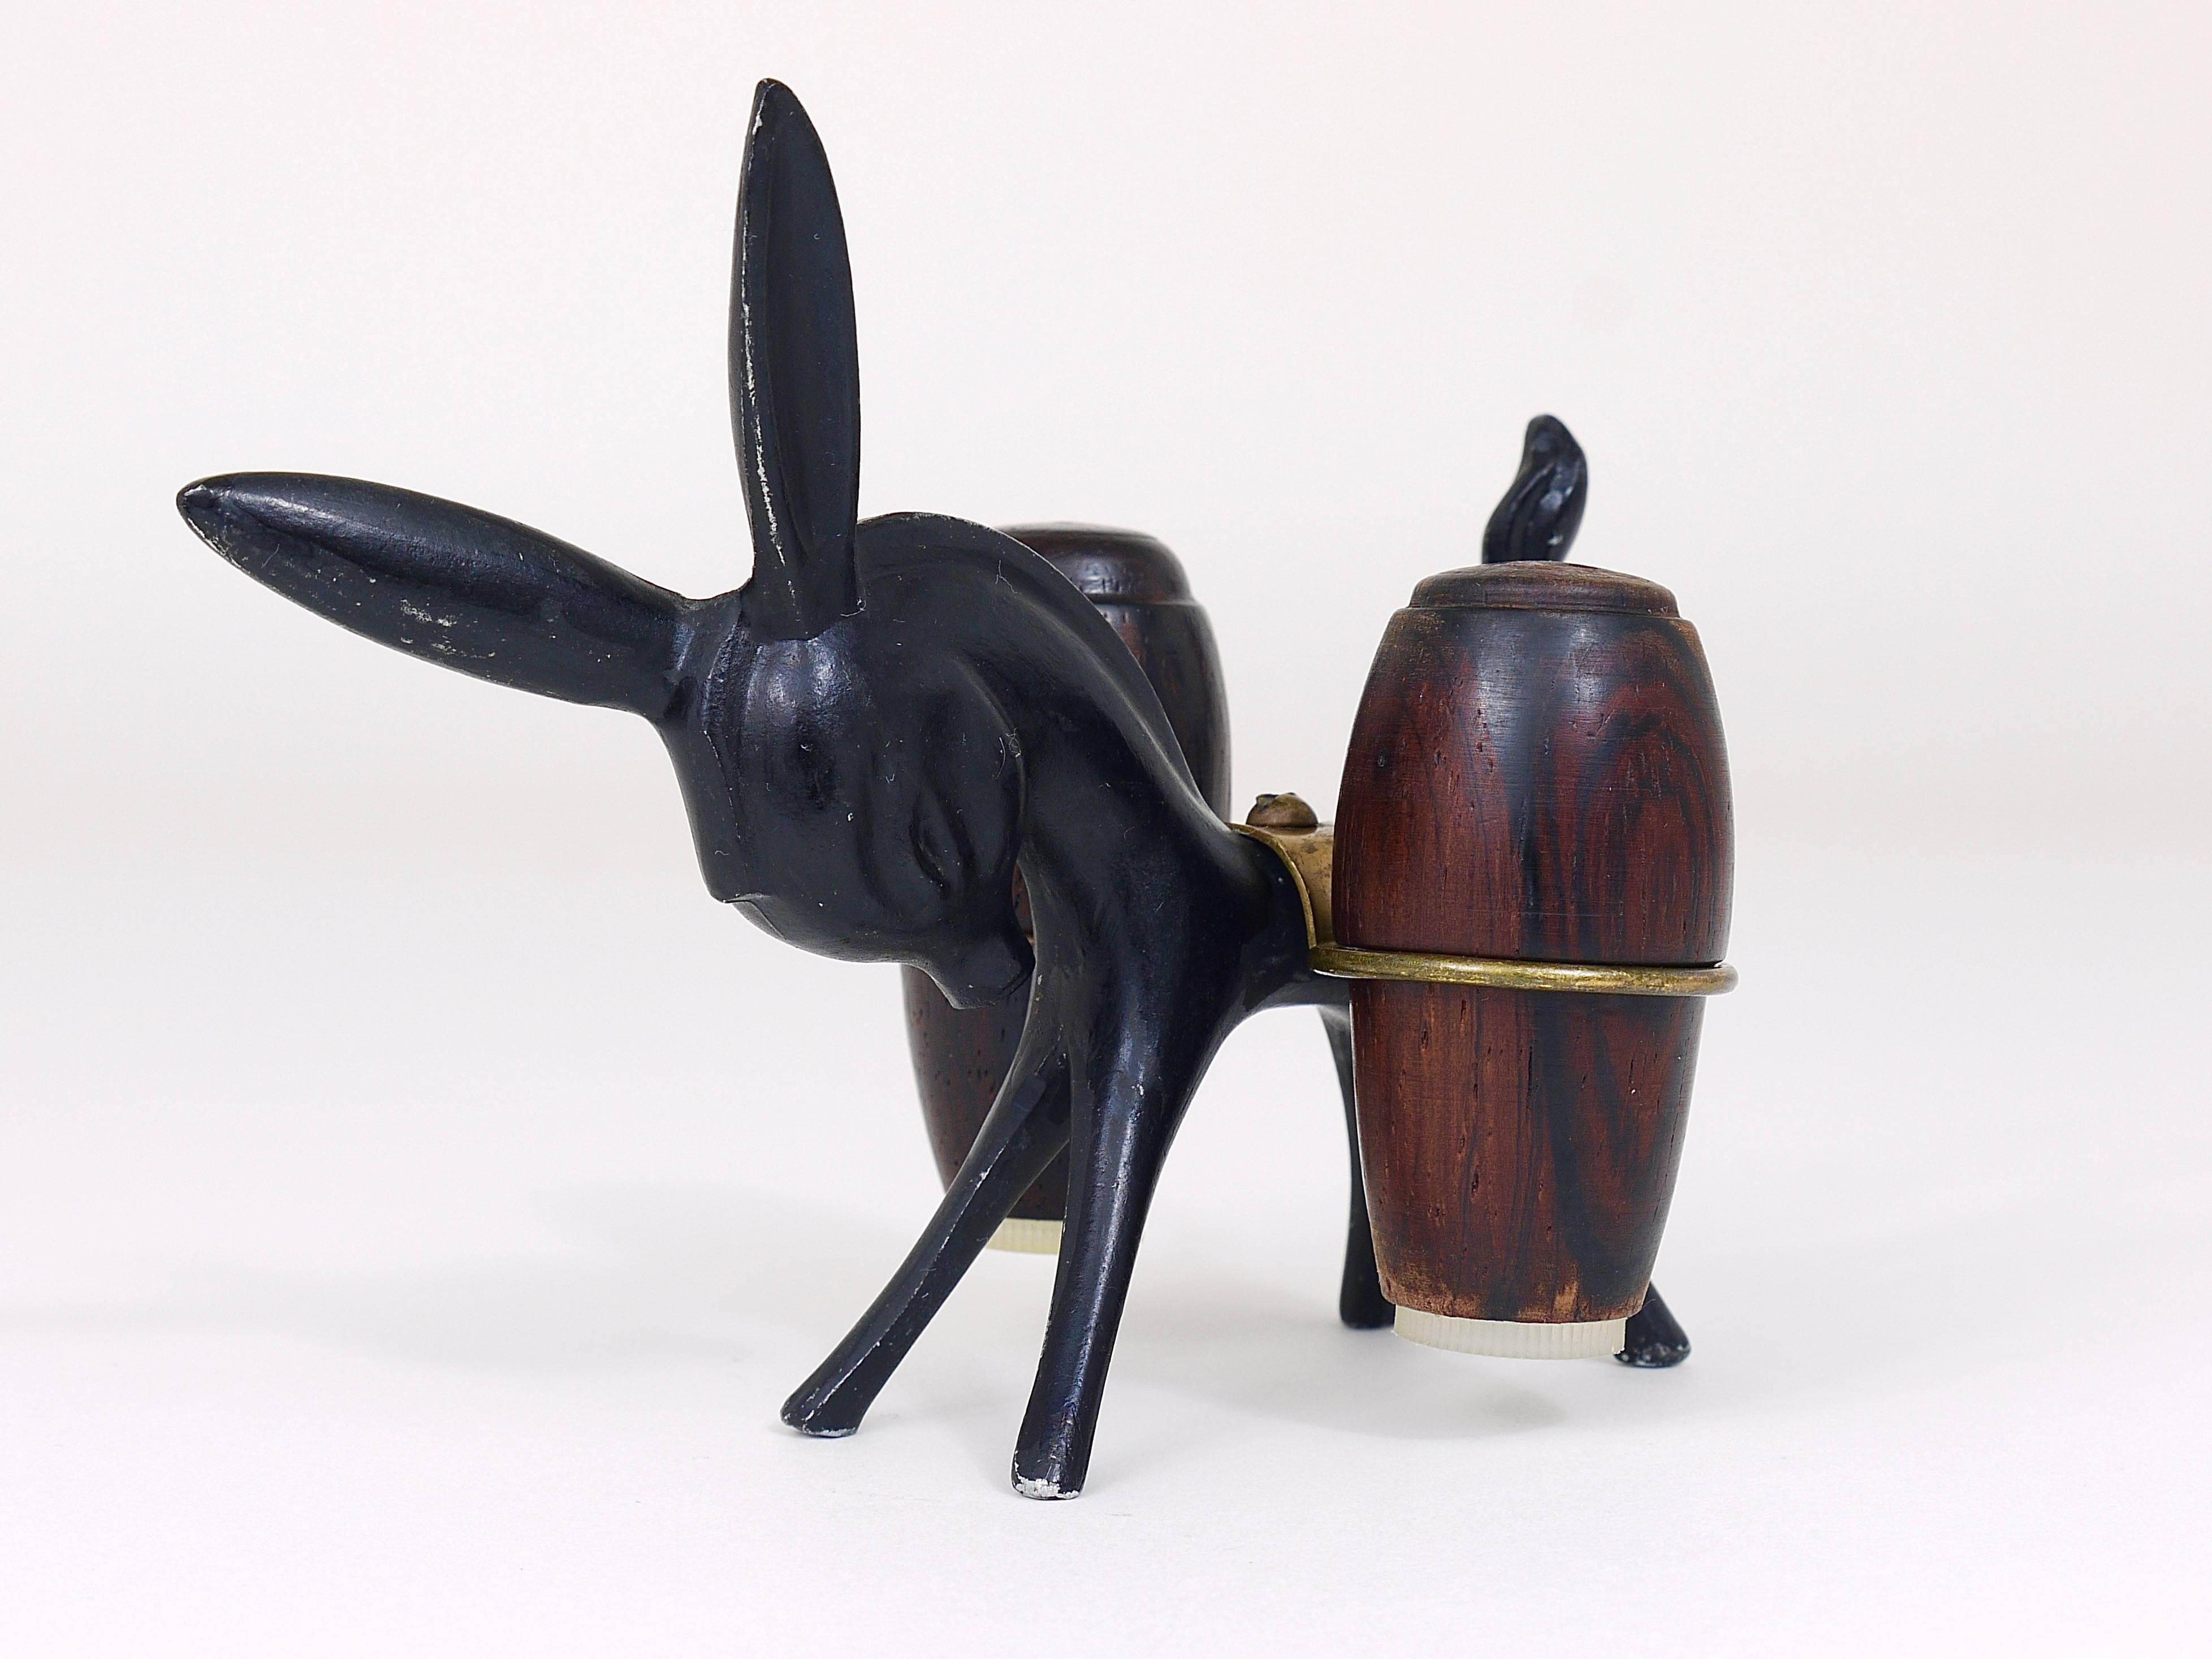 A charming Austrian midcentury shaker set, displaying a donkey. A very humorous design by Walter Bosse, executed by Hertha Baller Austria in the 1950s. Made of metal and walnut wood. In very good condition with marginal patina.